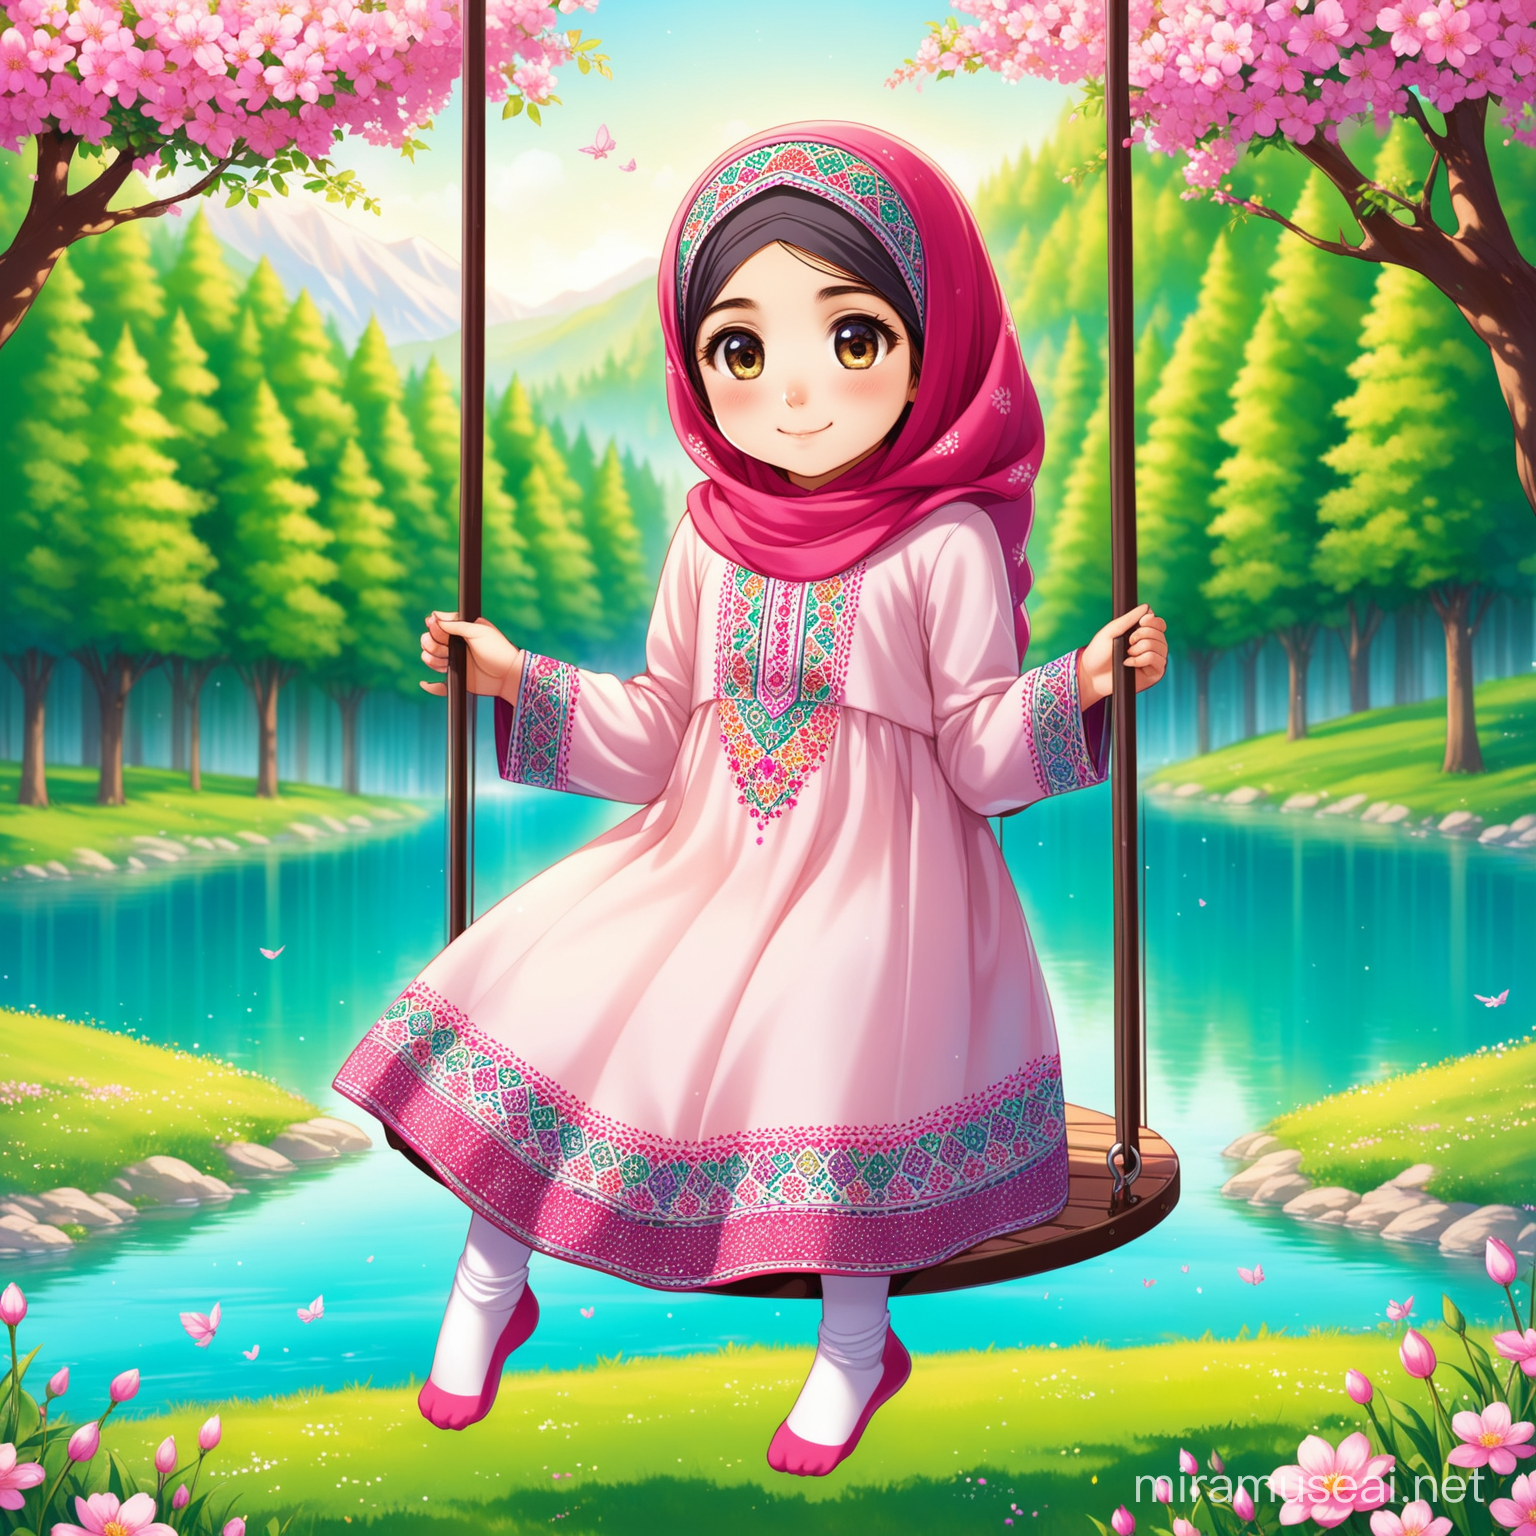 Fatemeh is Persian little girl, 8 years old , Muslim, full height, no hair out of veil(Hijab), smaller eyes, bigger nose, white skin, cute, smiling, wearing socks, clothes with a lot of Persian designs.

Fatemeh is swinging, sittong on the swing.

Atmosphere forest, grass, pink flowers, spring, lake.